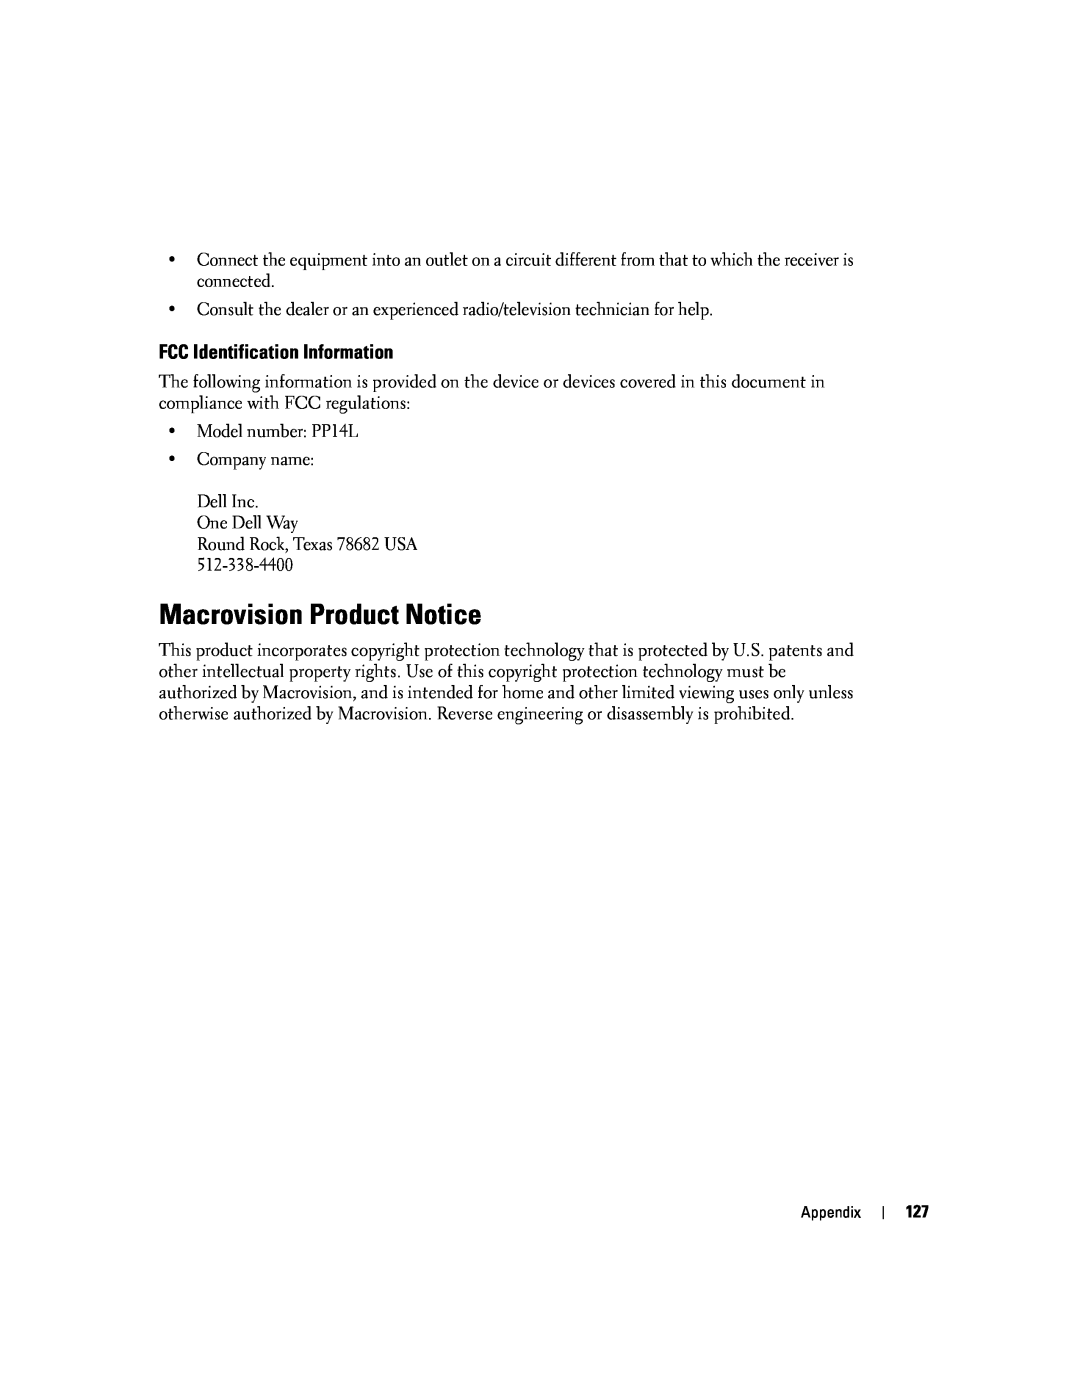 Dell 9300 owner manual Macrovision Product Notice, FCC Identification Information 